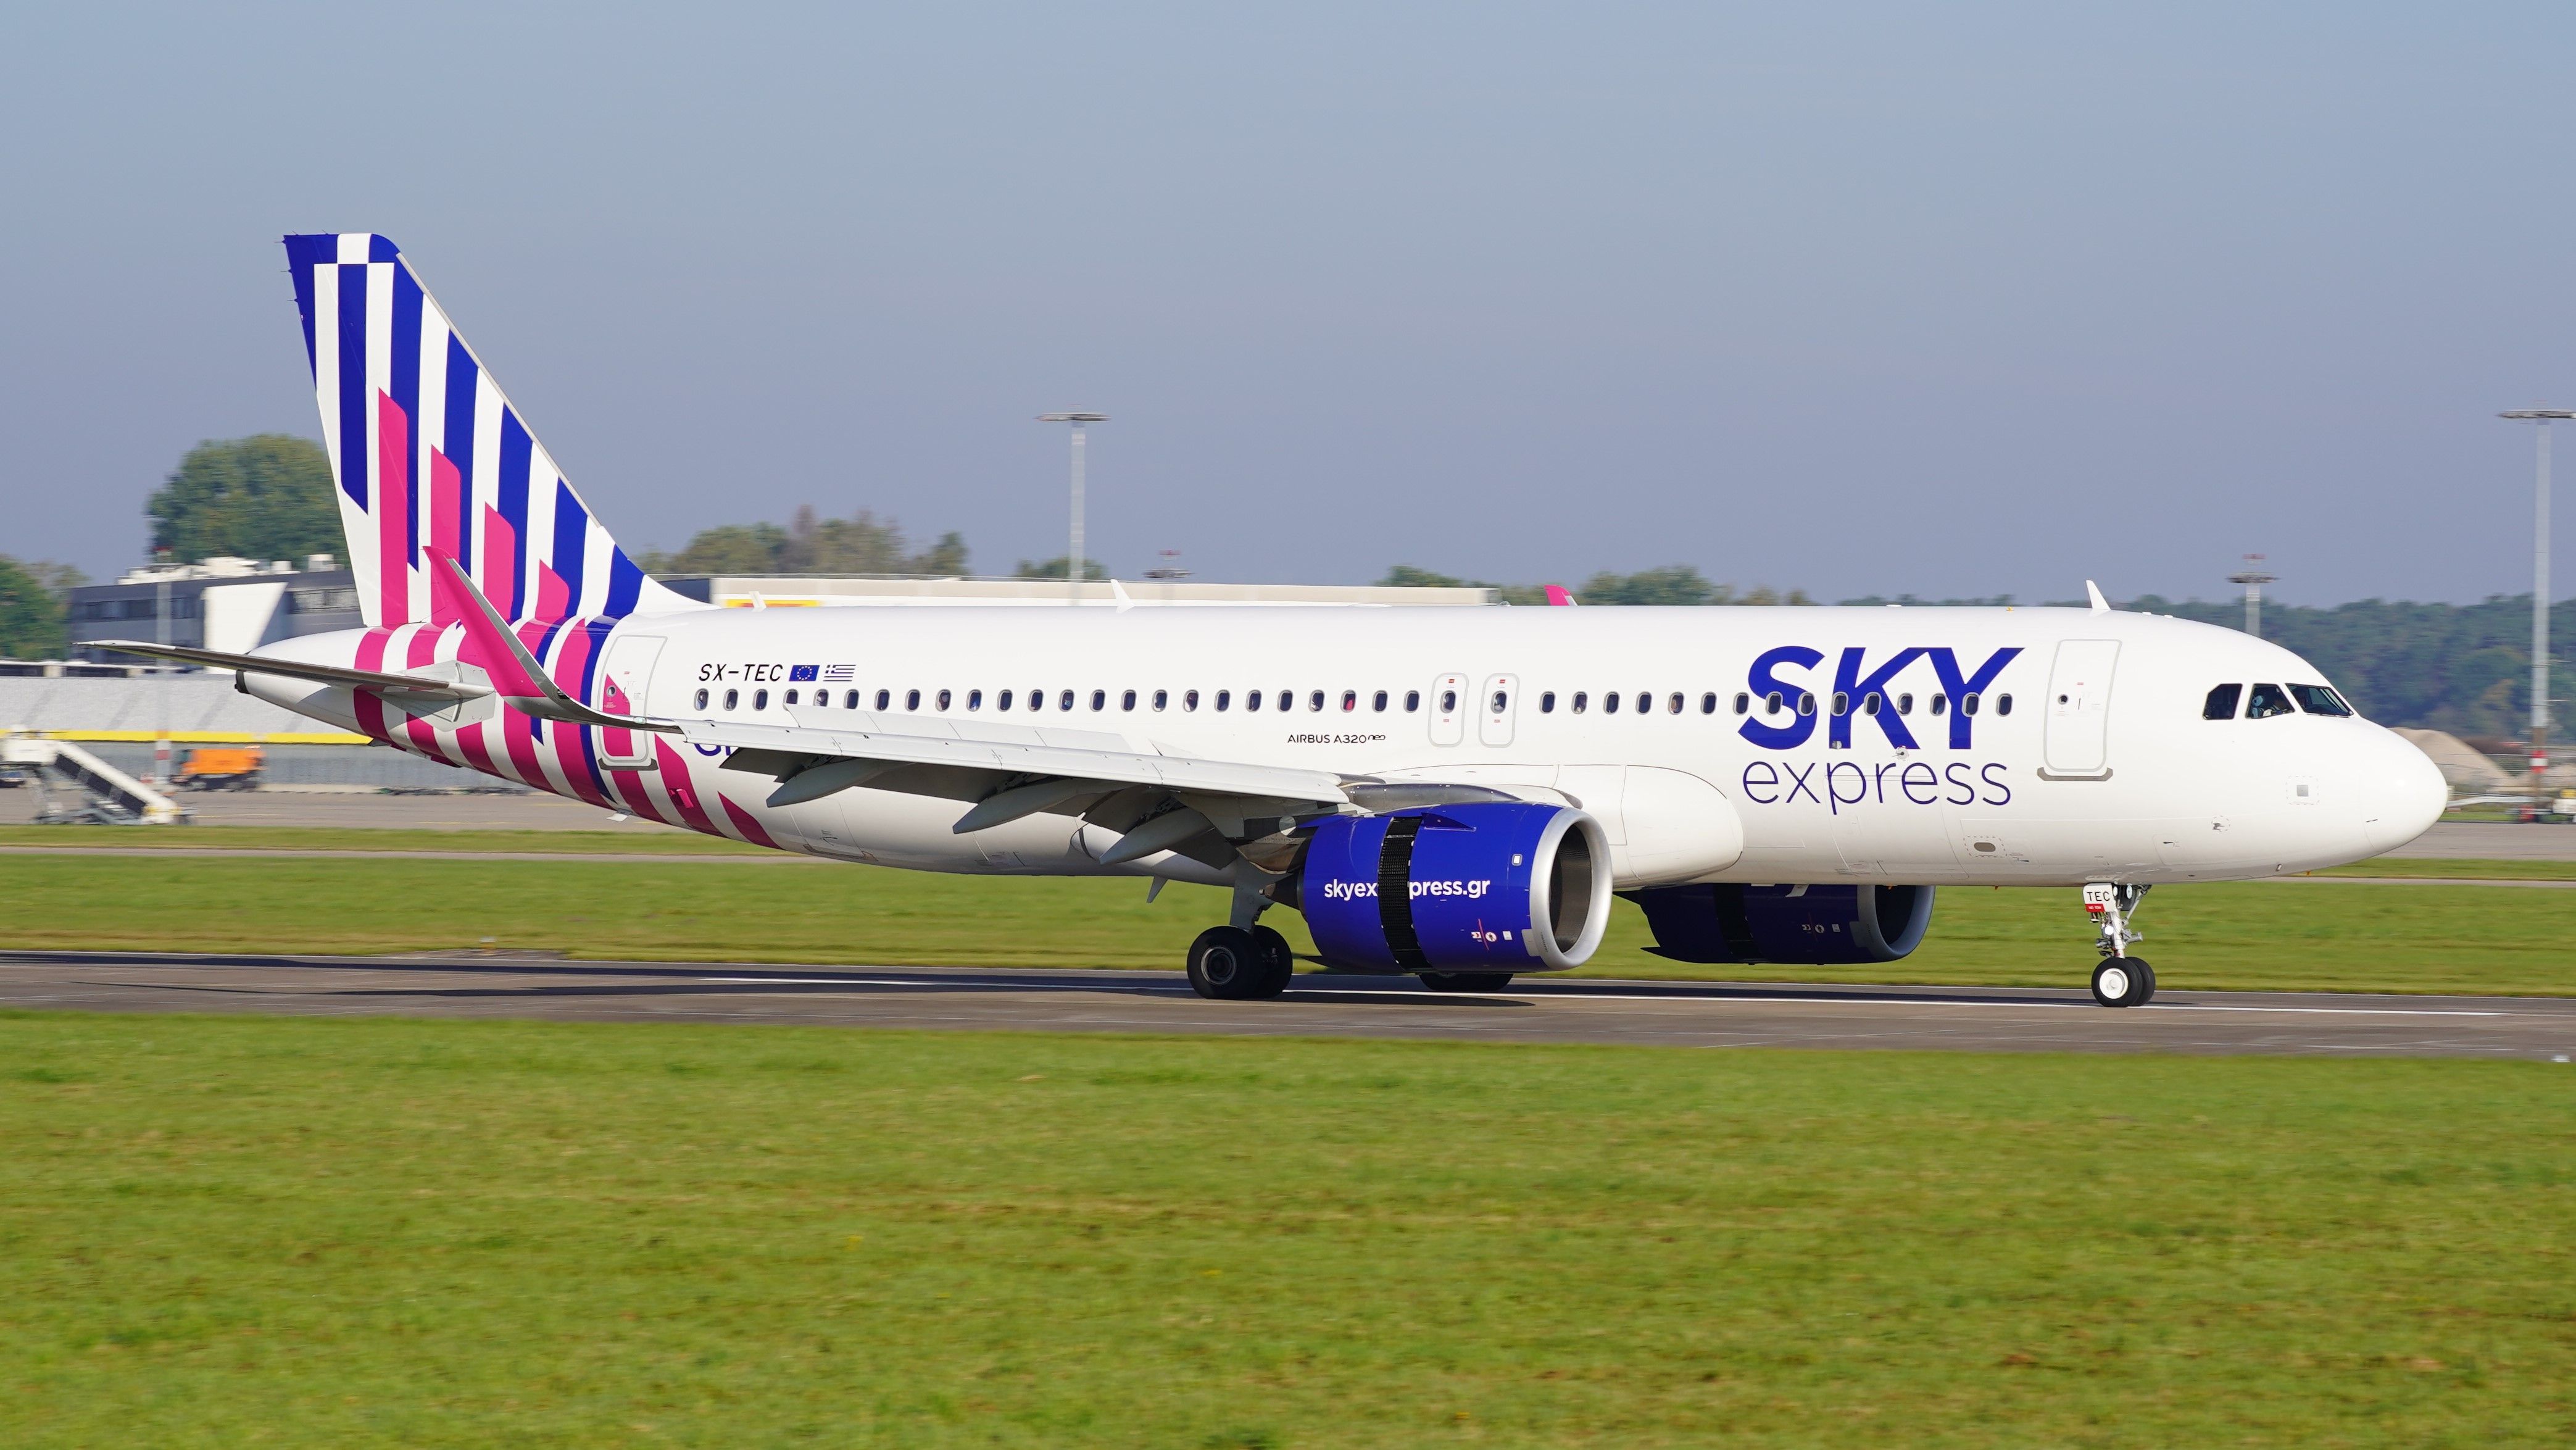 Hannover_Airport_SKY_express_Airbus_A320-251N_SX-TEC_(DSC00198)